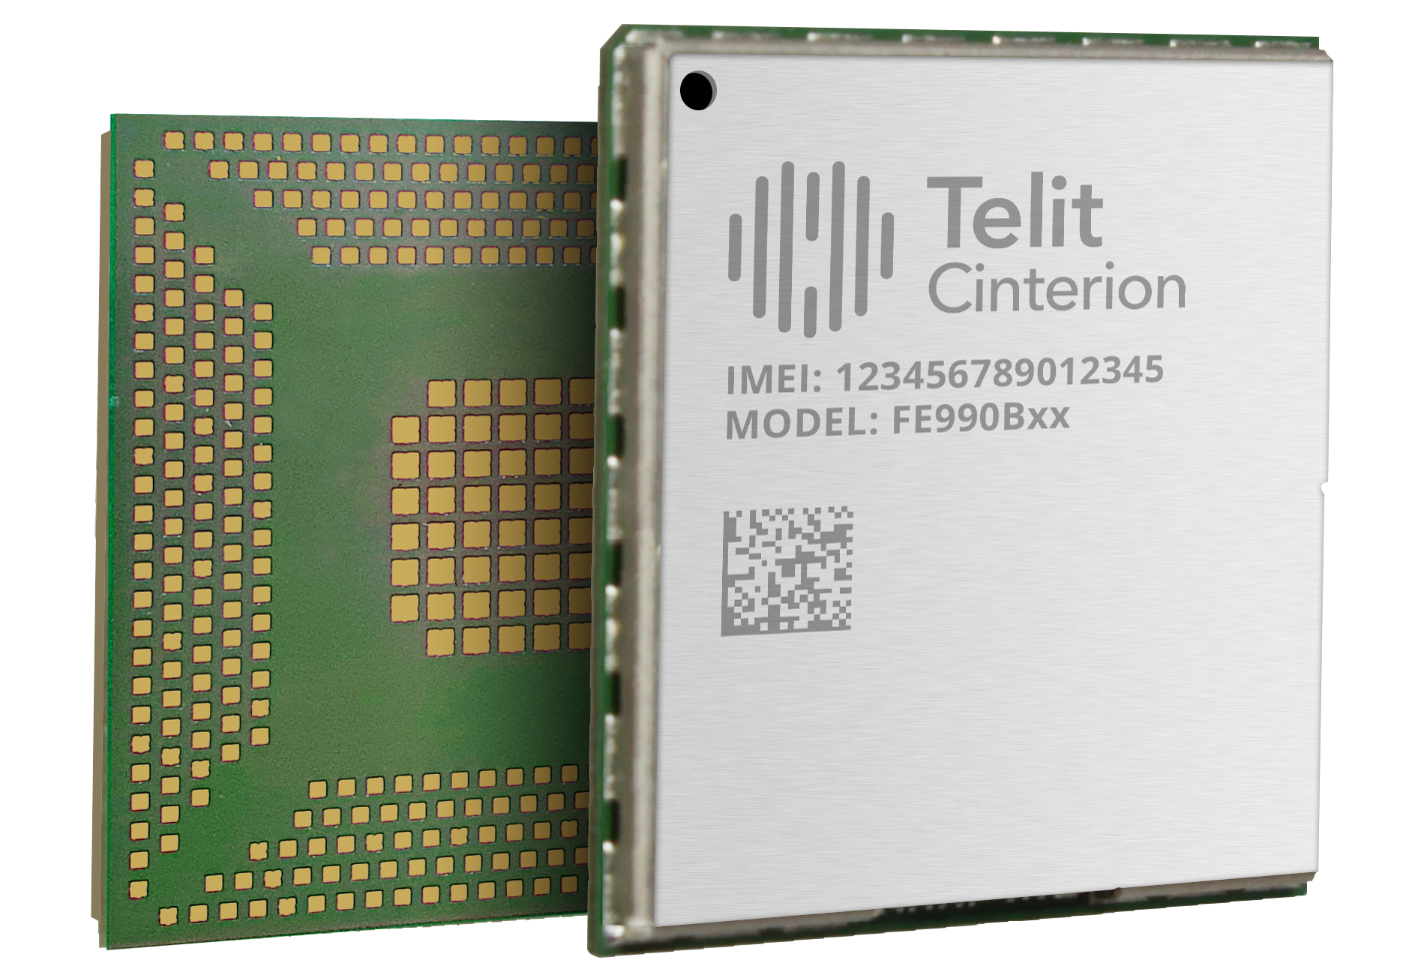 The telit citrion chip on a white background.